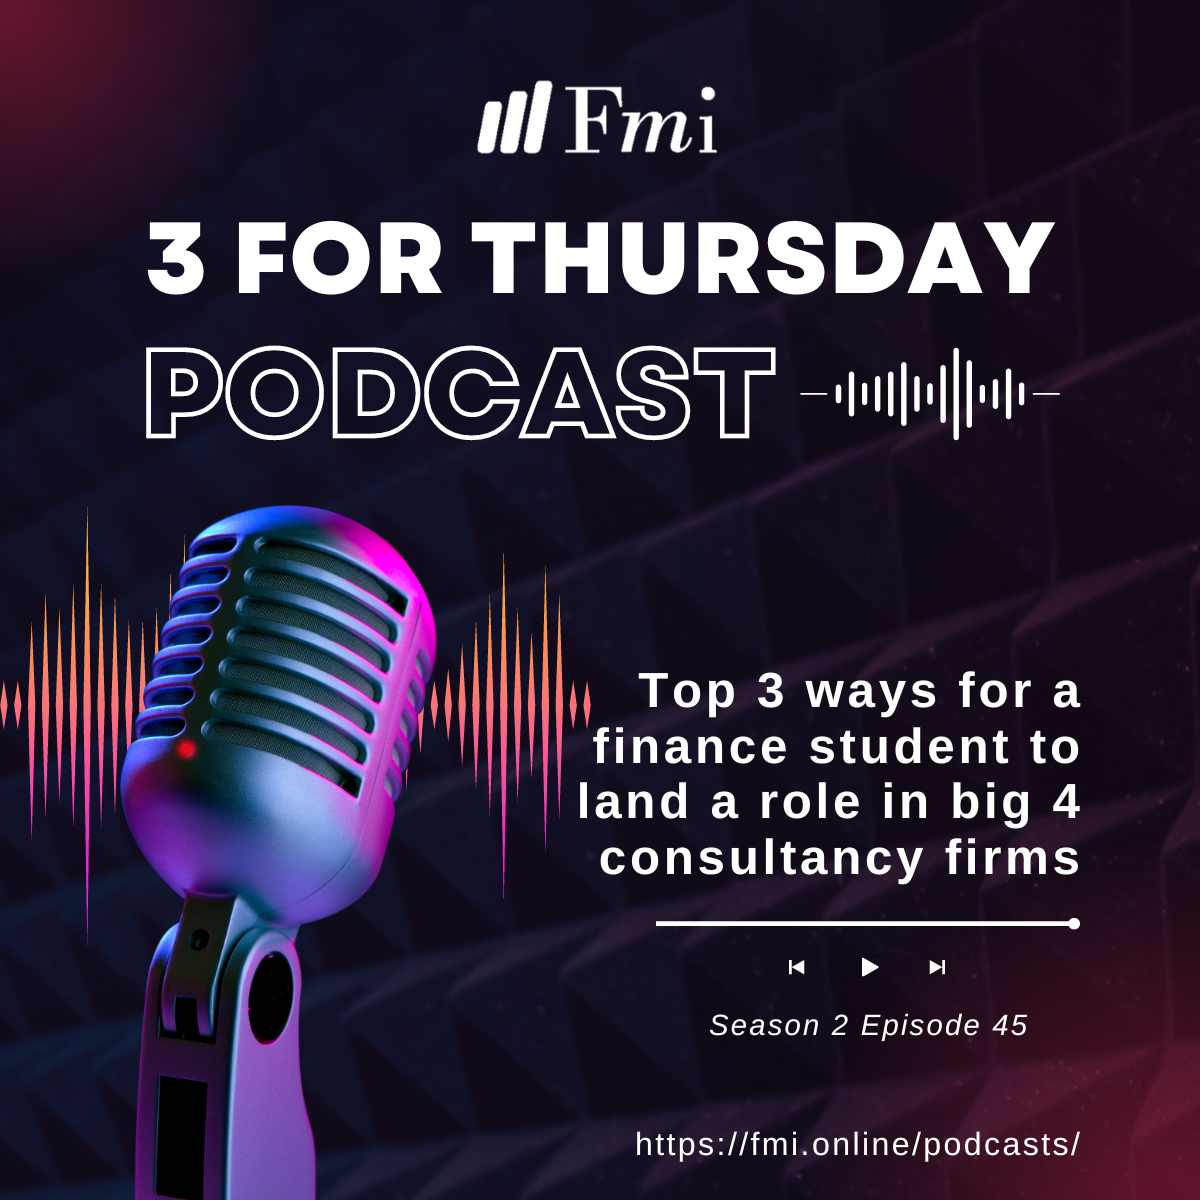 Top 3 ways for a finance student to land a role in big 4 consultancy firms | Fmi Online